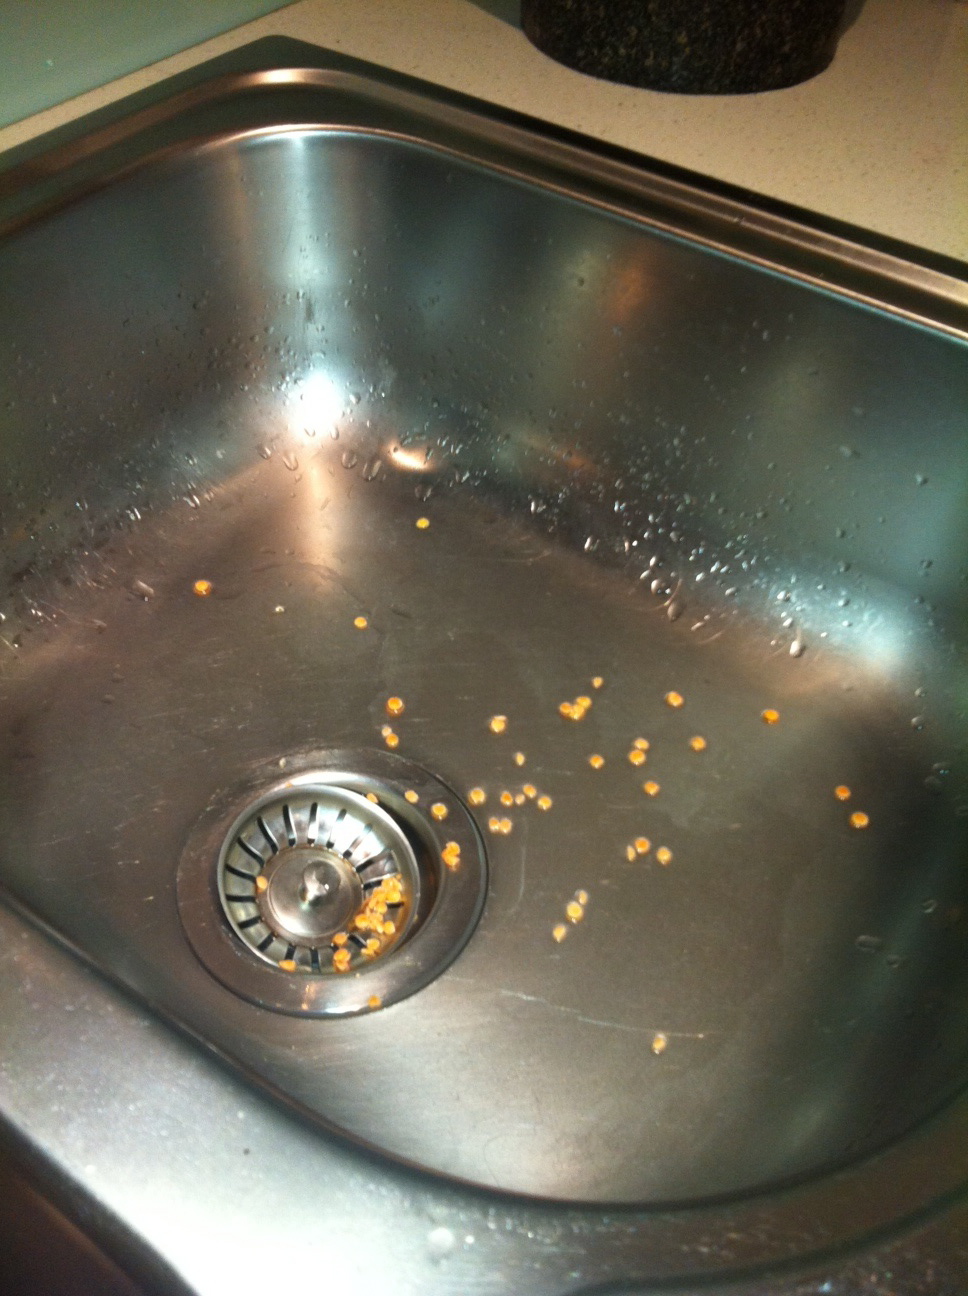 lentils in the sink